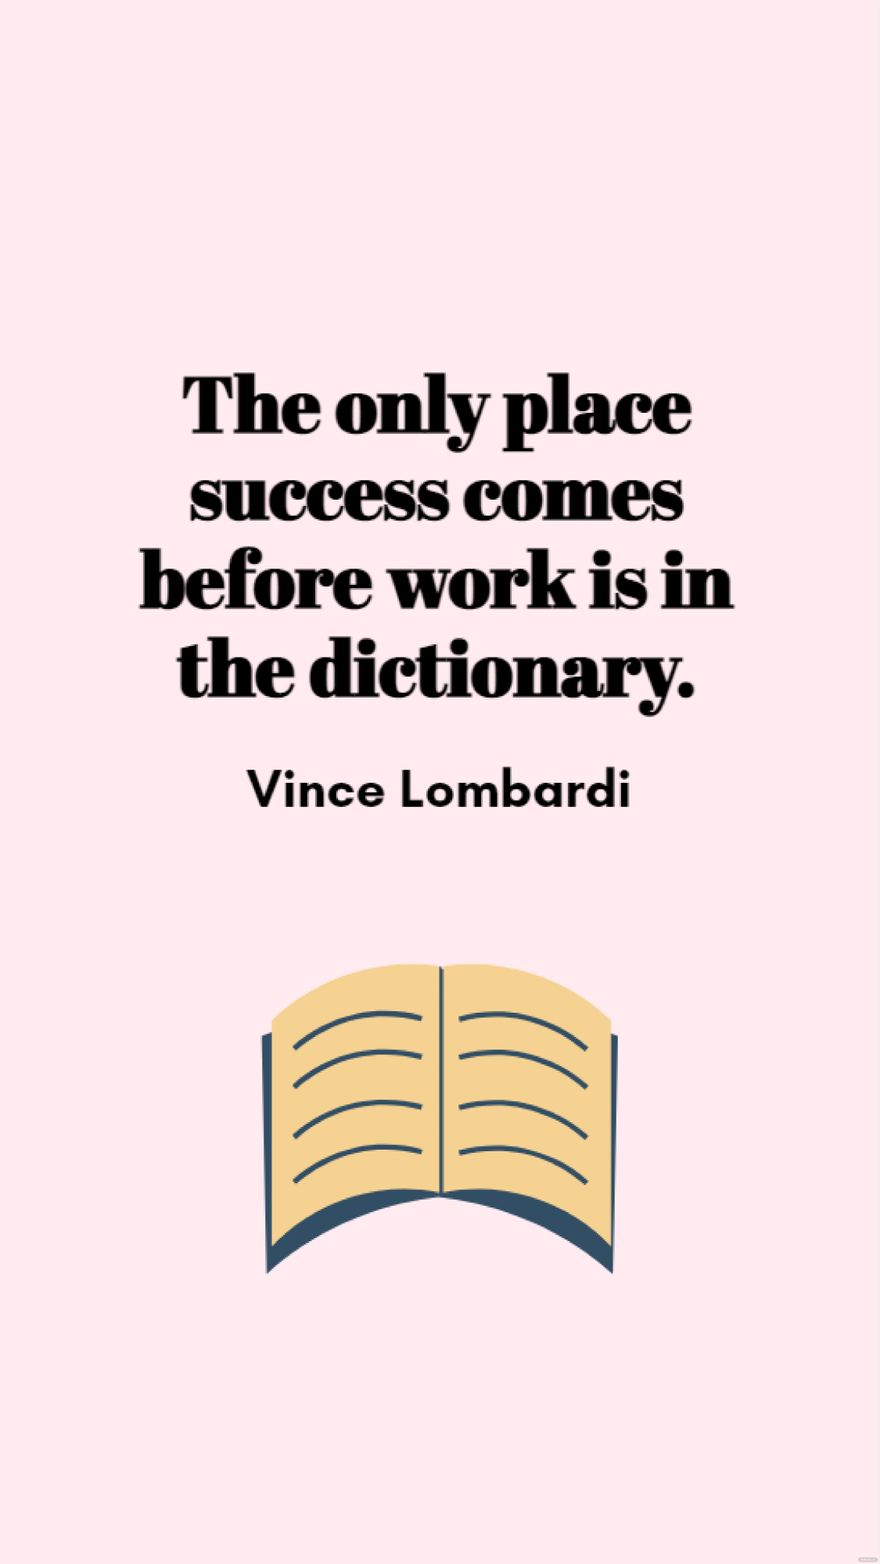 Free Vince Lombardi - The only place success comes before work is in the dictionary. in JPG